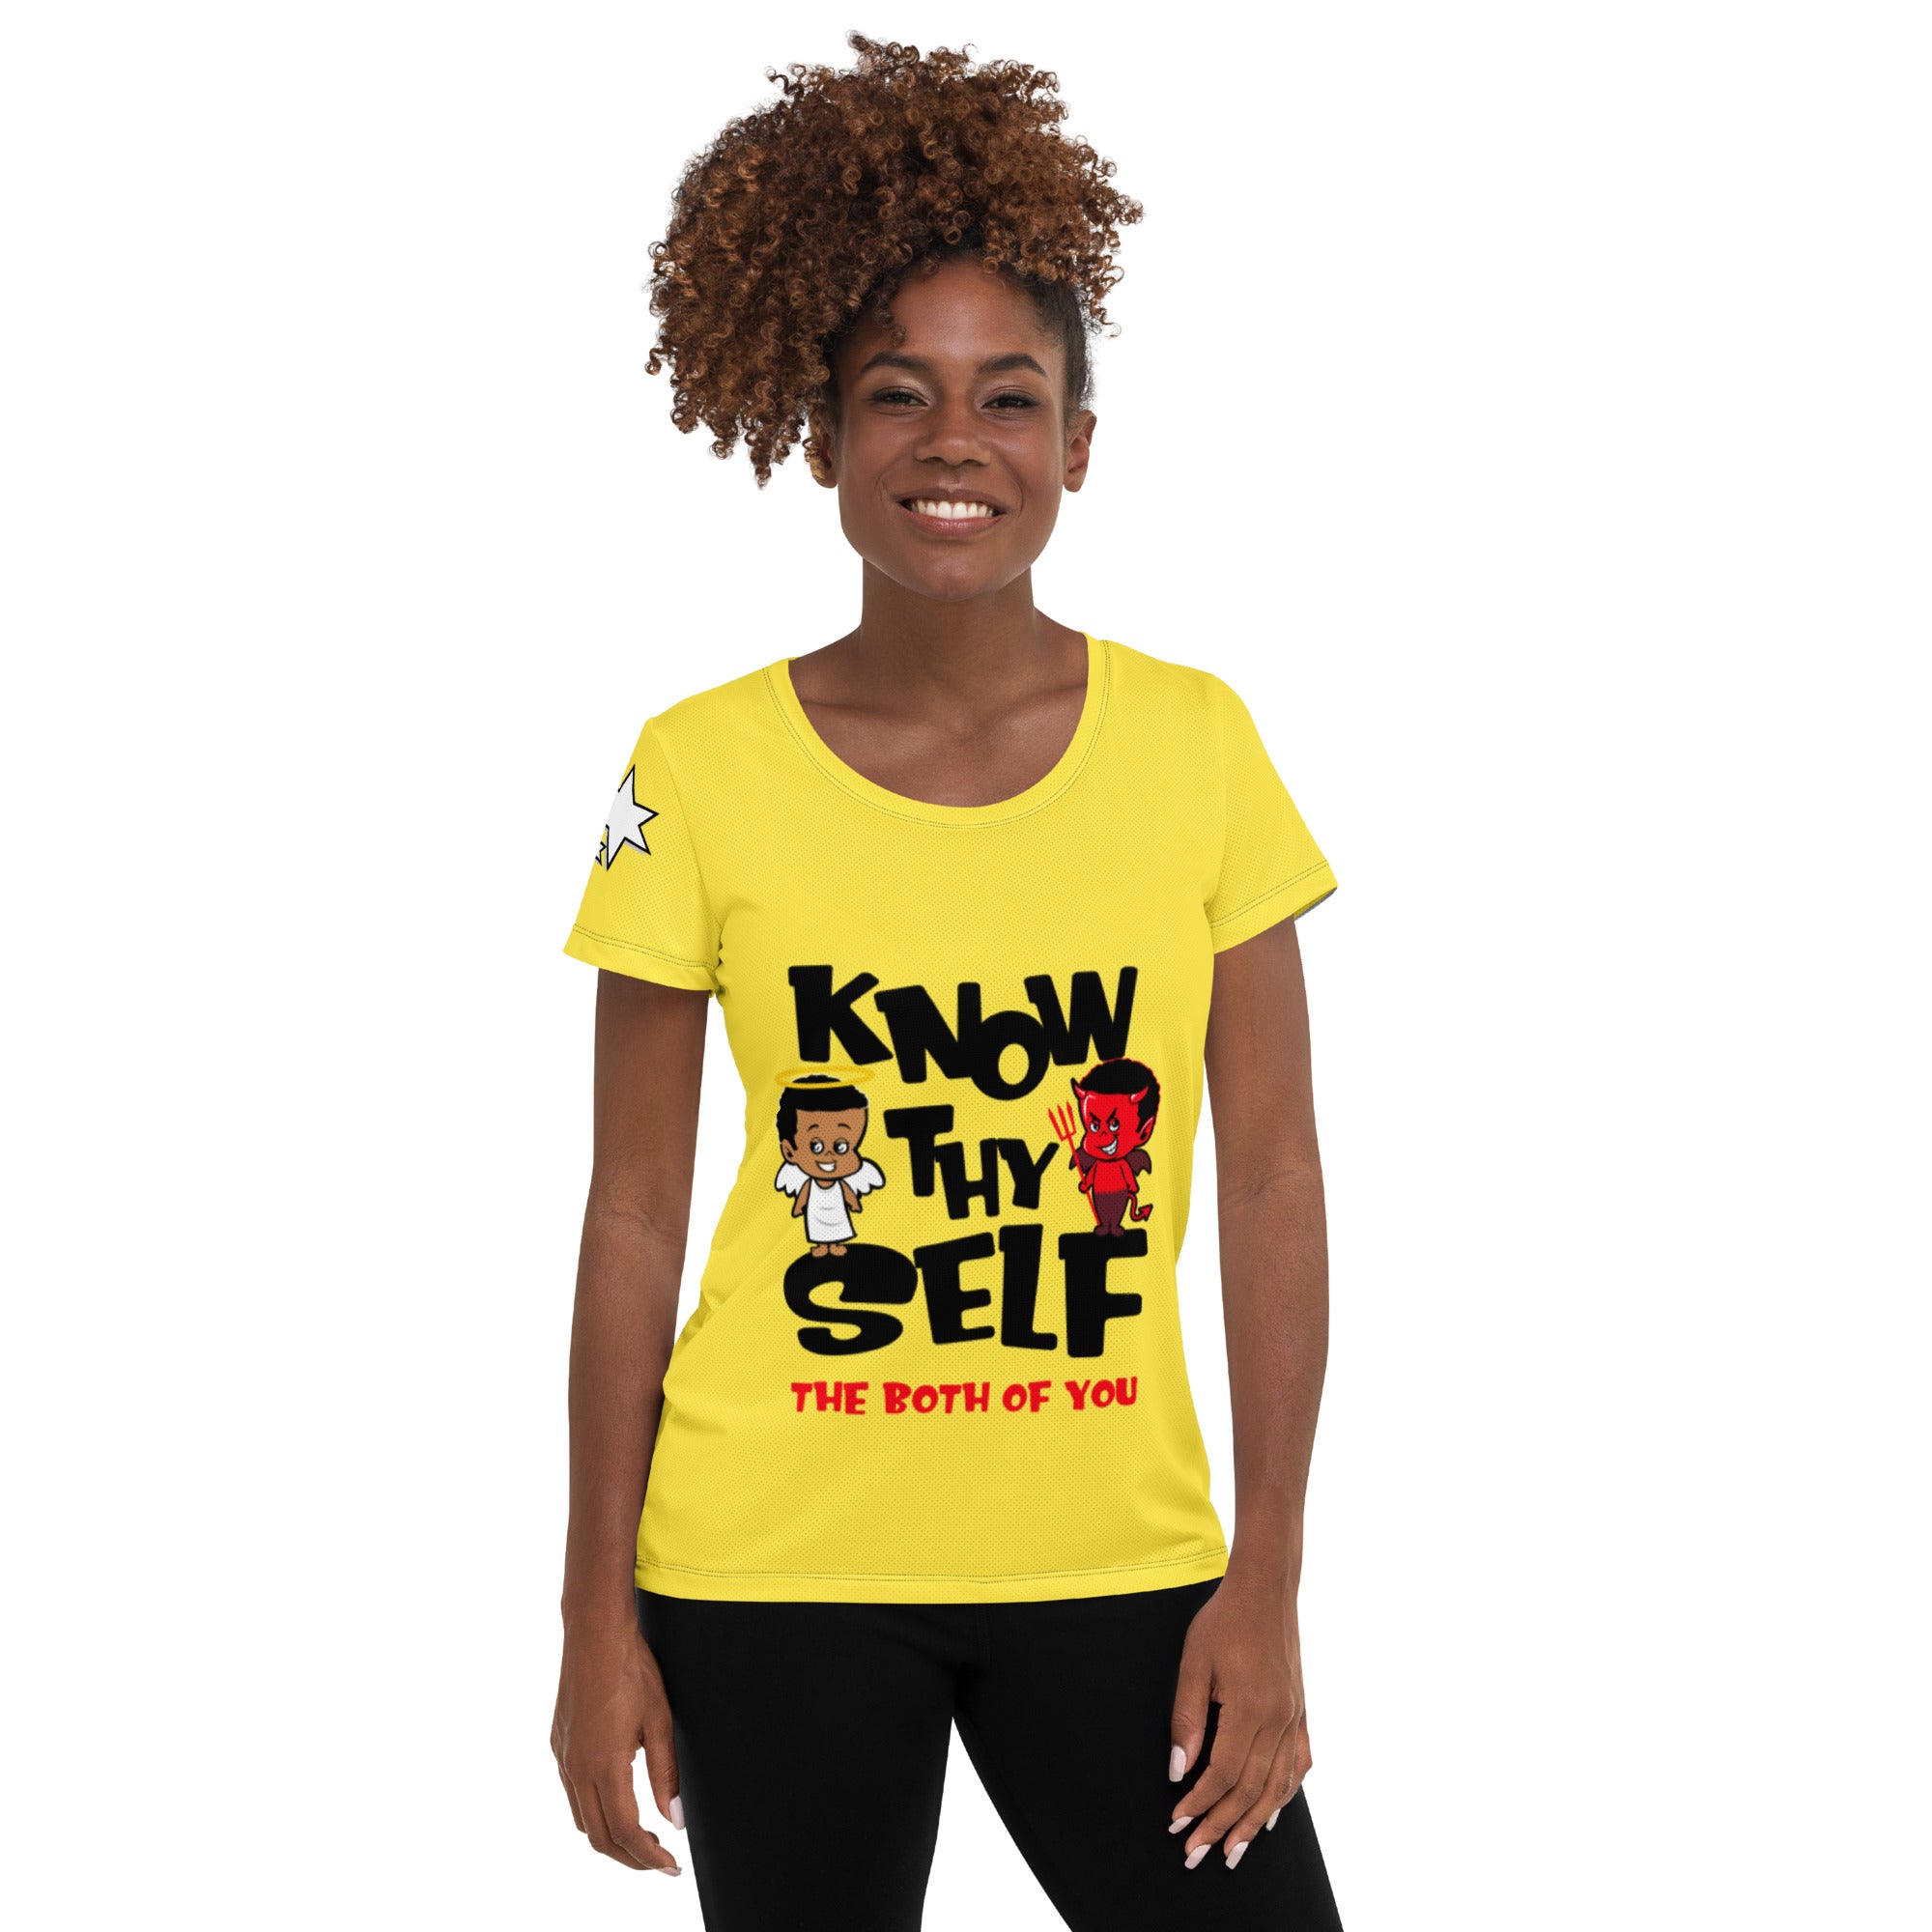 Know Thyself - All-Over Print Women's Athletic T-shirt